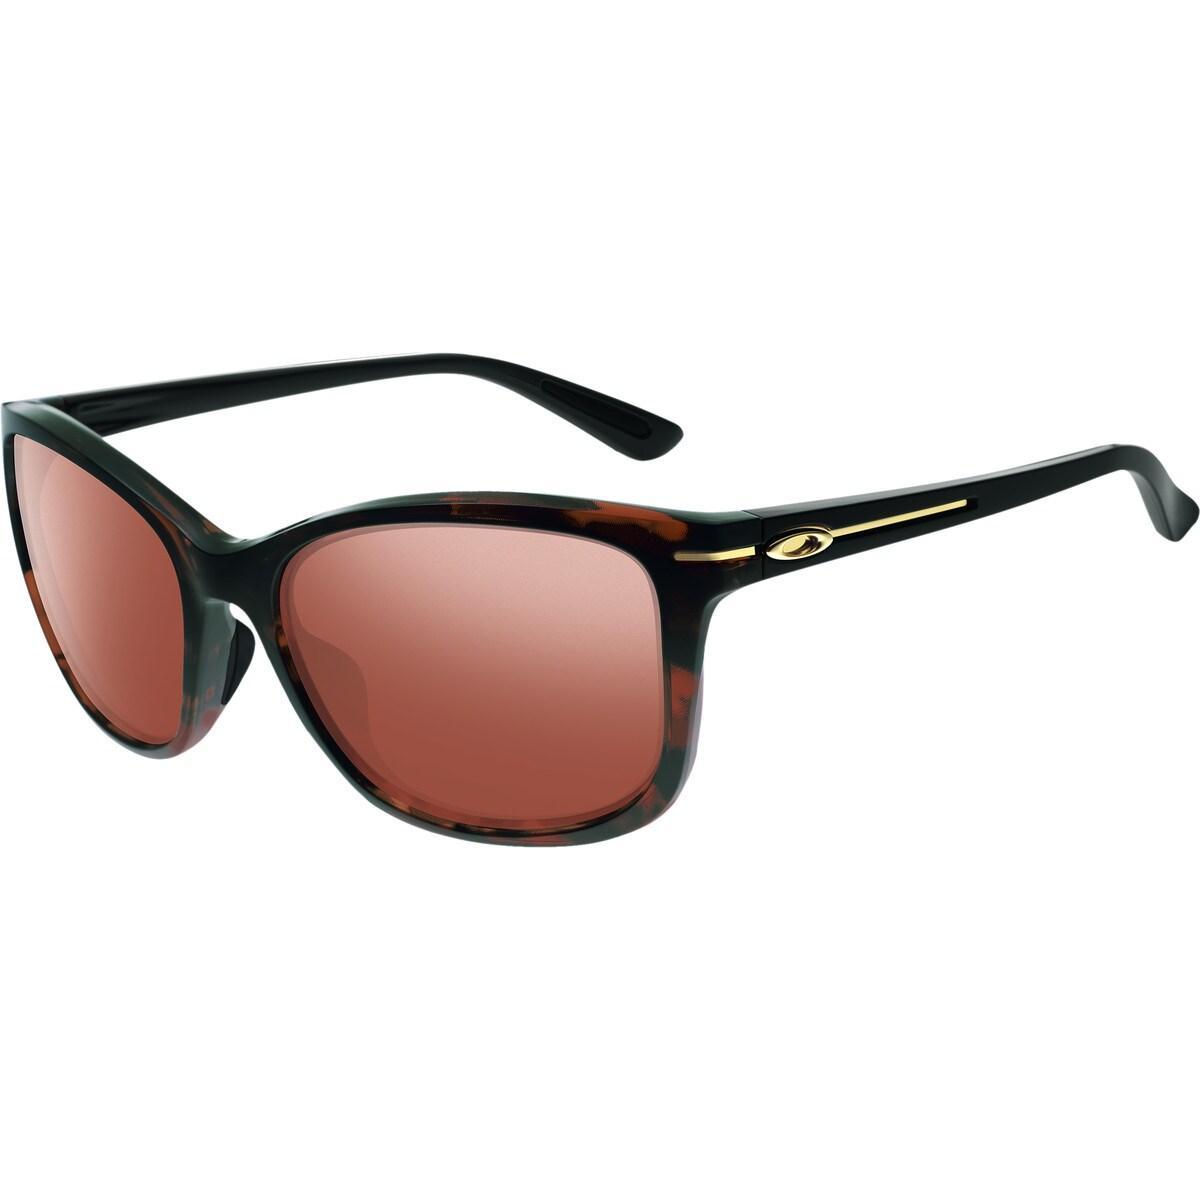 Drop In Sunglasses - Women's Product Image